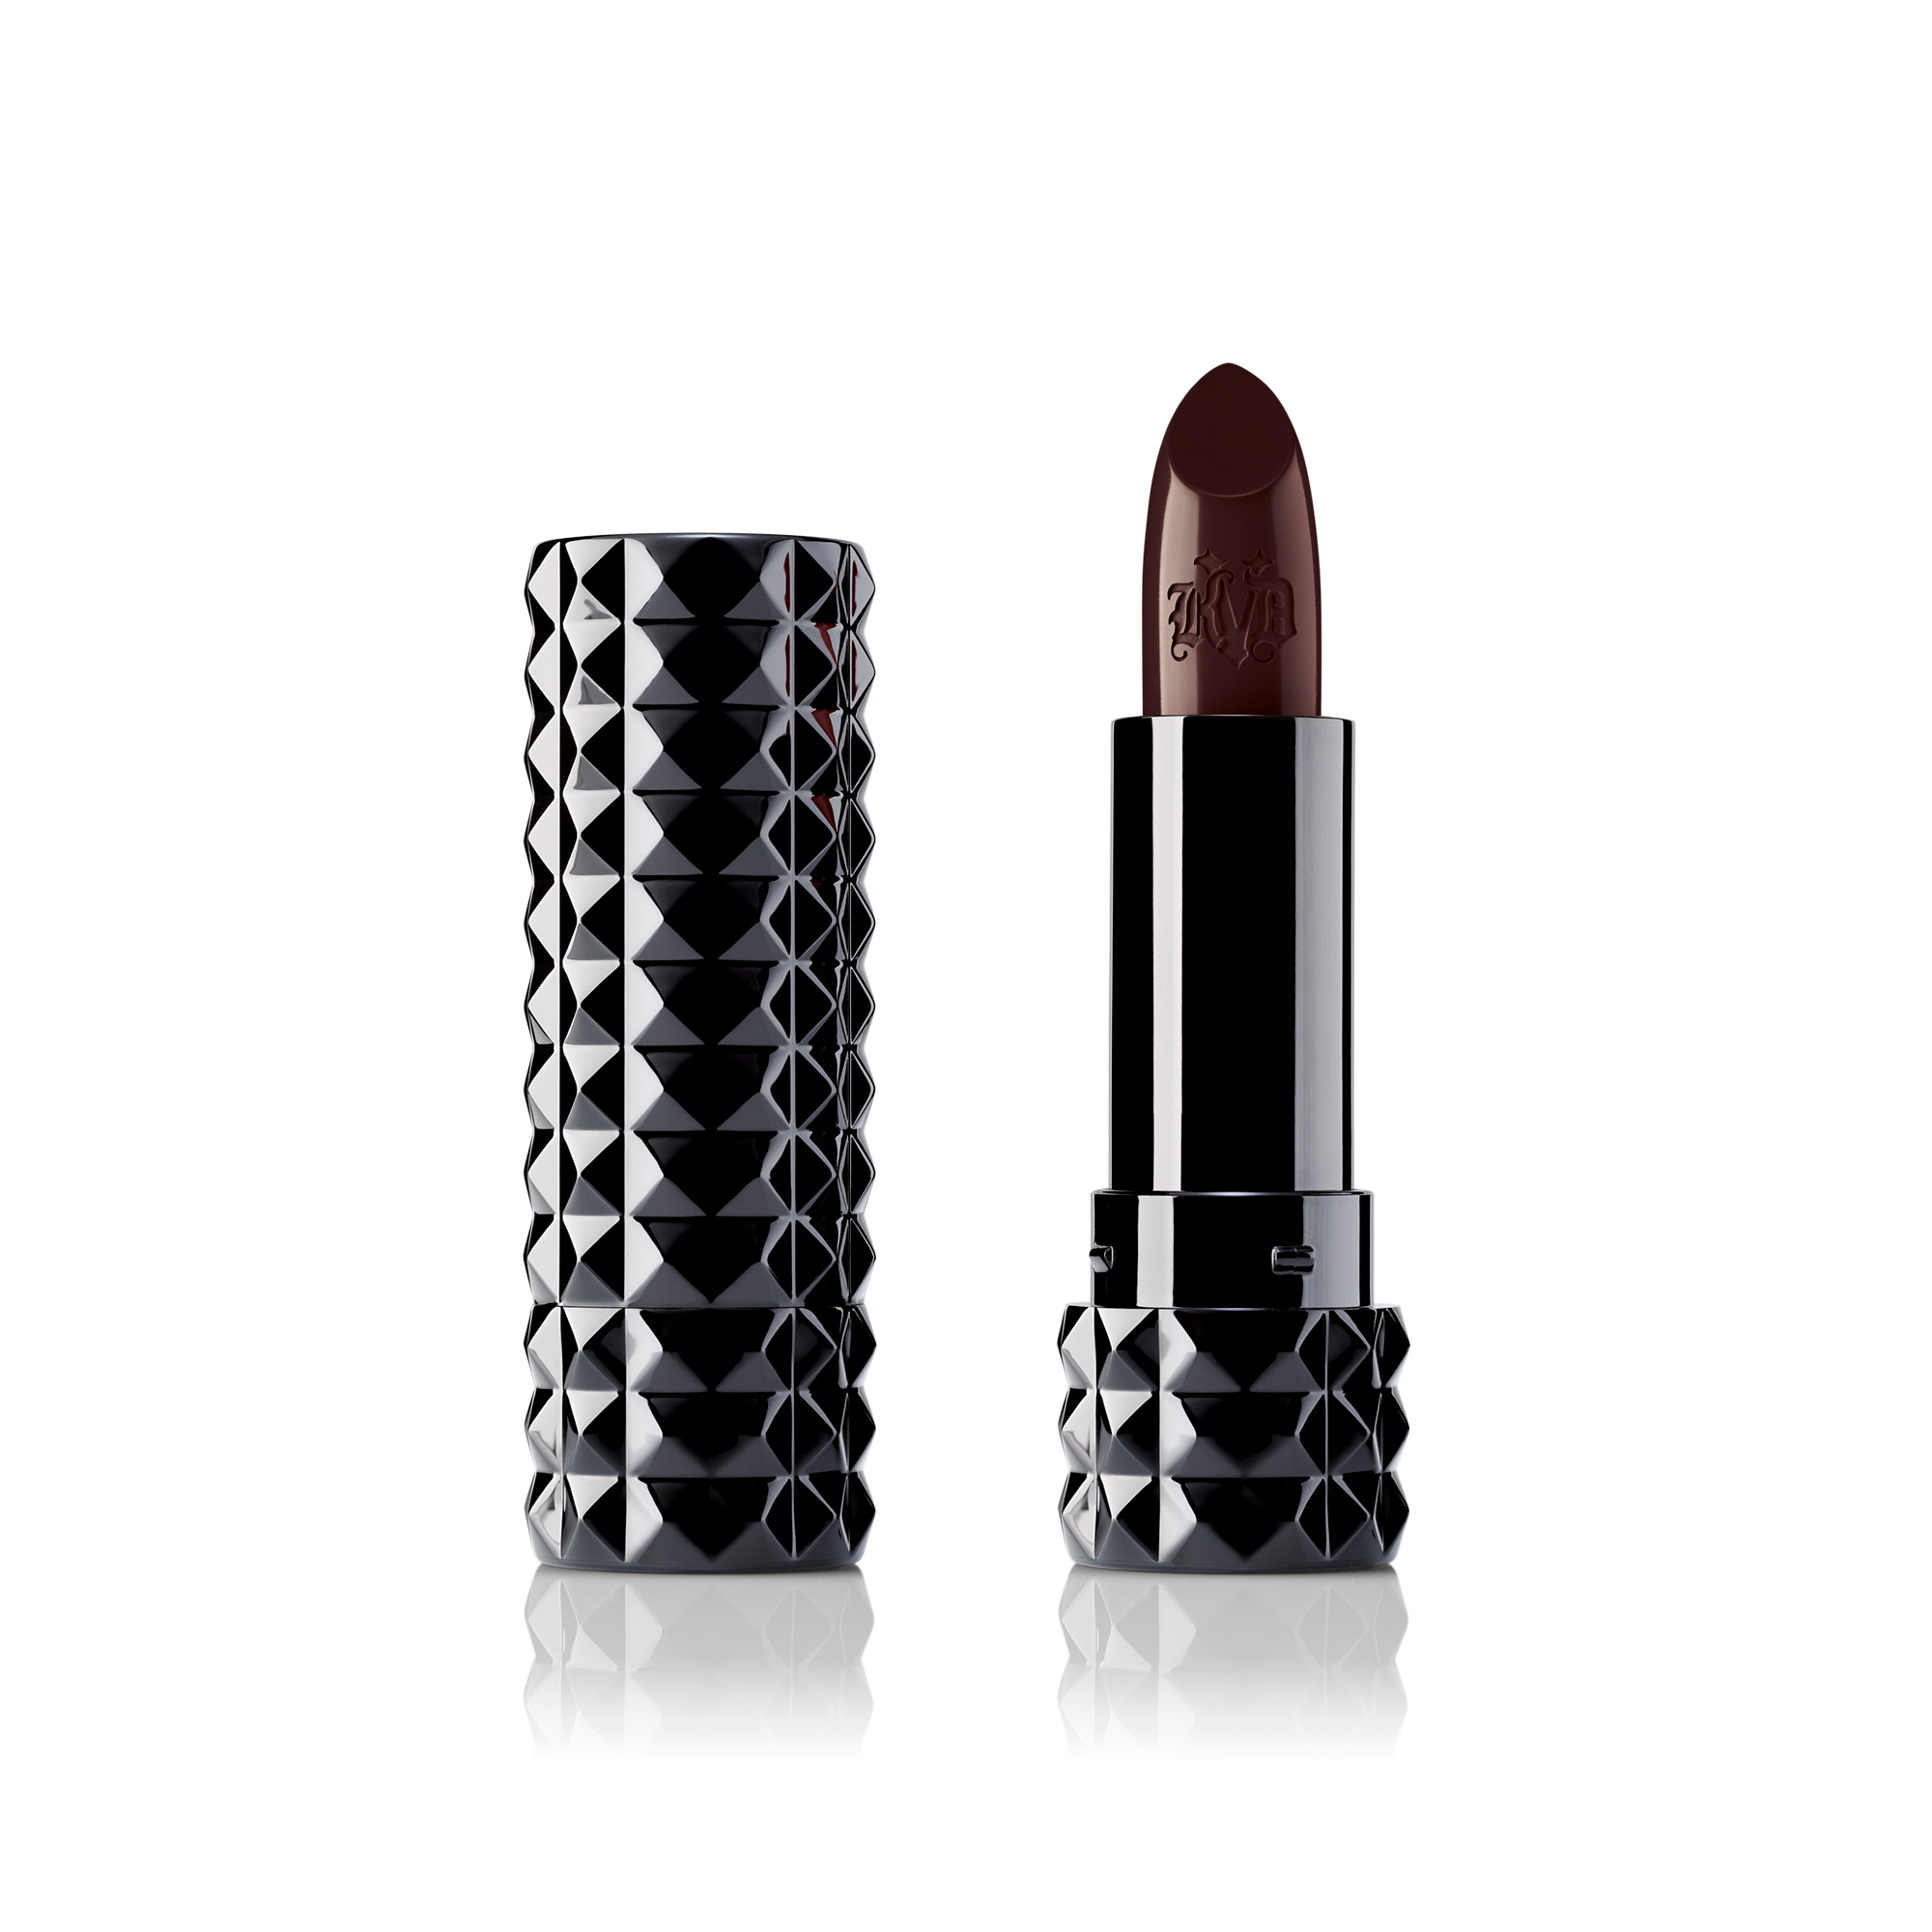 Kat Von D Beauty’s creamy, unbelievably pigmented, Studded Kiss Crème in Vampira (satin-matte deep reddish burgundy) is featured in the 2019 Sephora Birthday Gift mini-set. Full size shown.